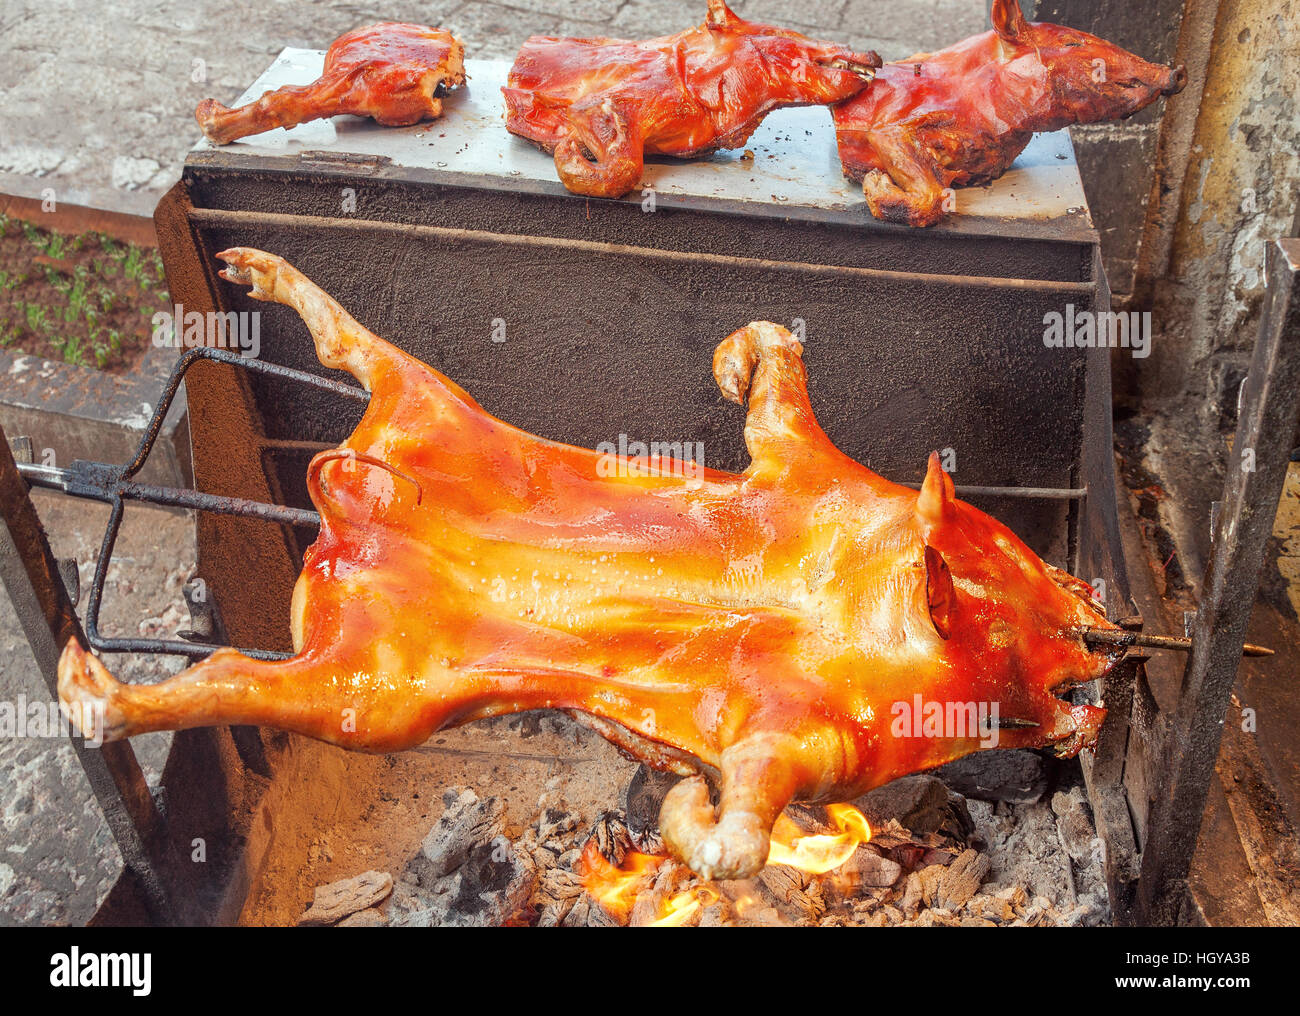 Roasted pig on a spit, the Chinese traditional barbecue concept. Stock Photo